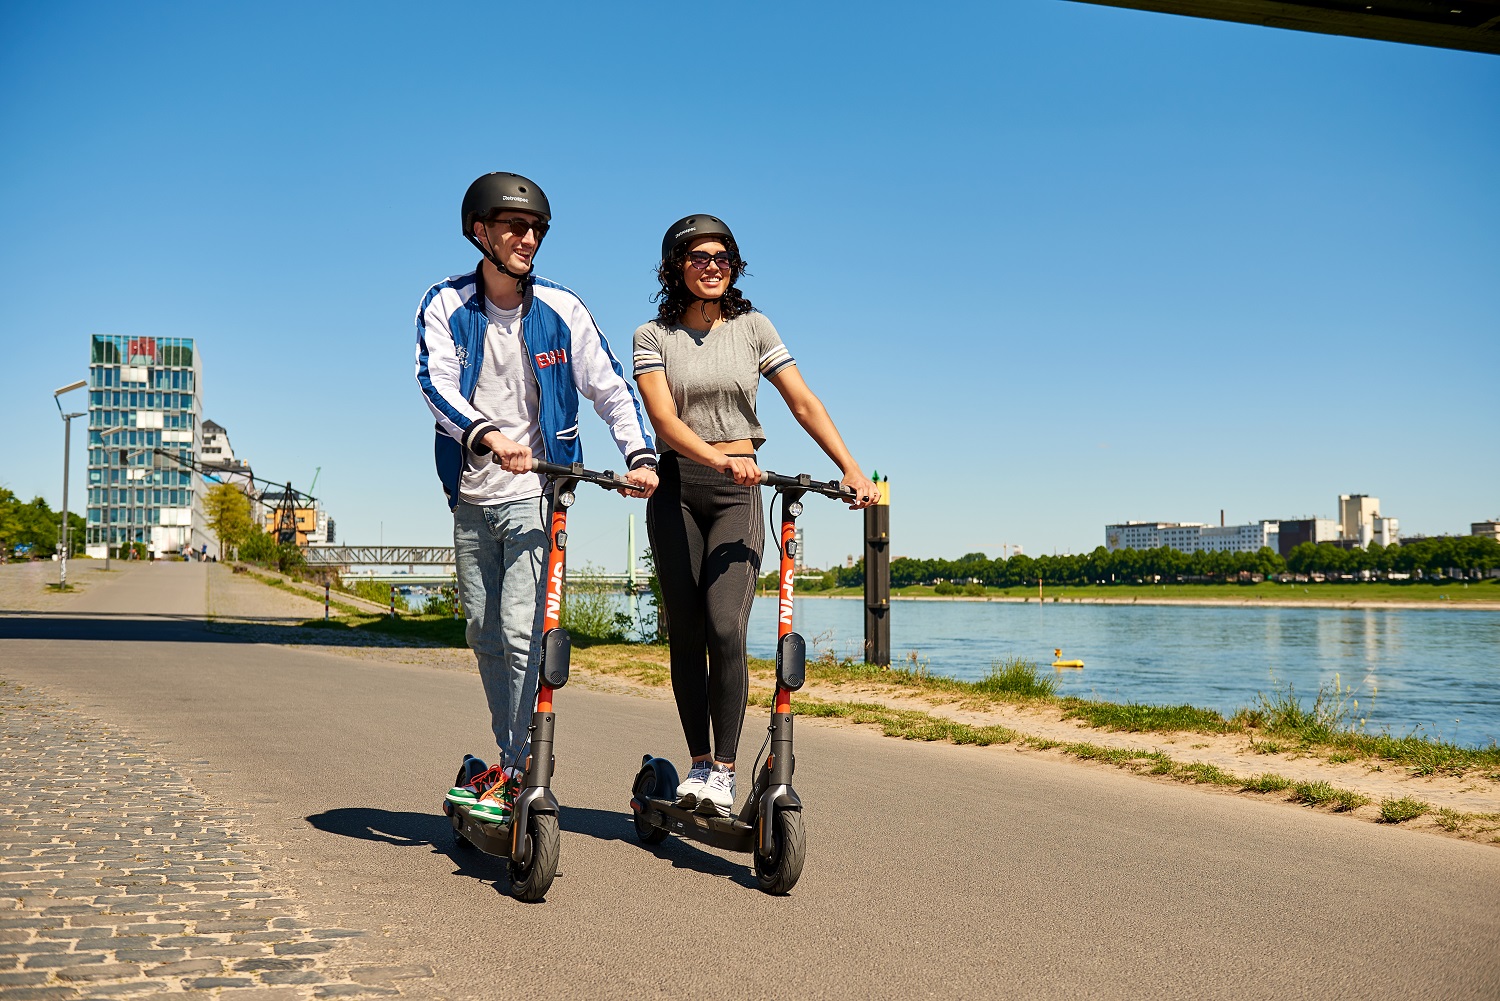 Ford Takes Its Spin Scooter Business International With German Debut